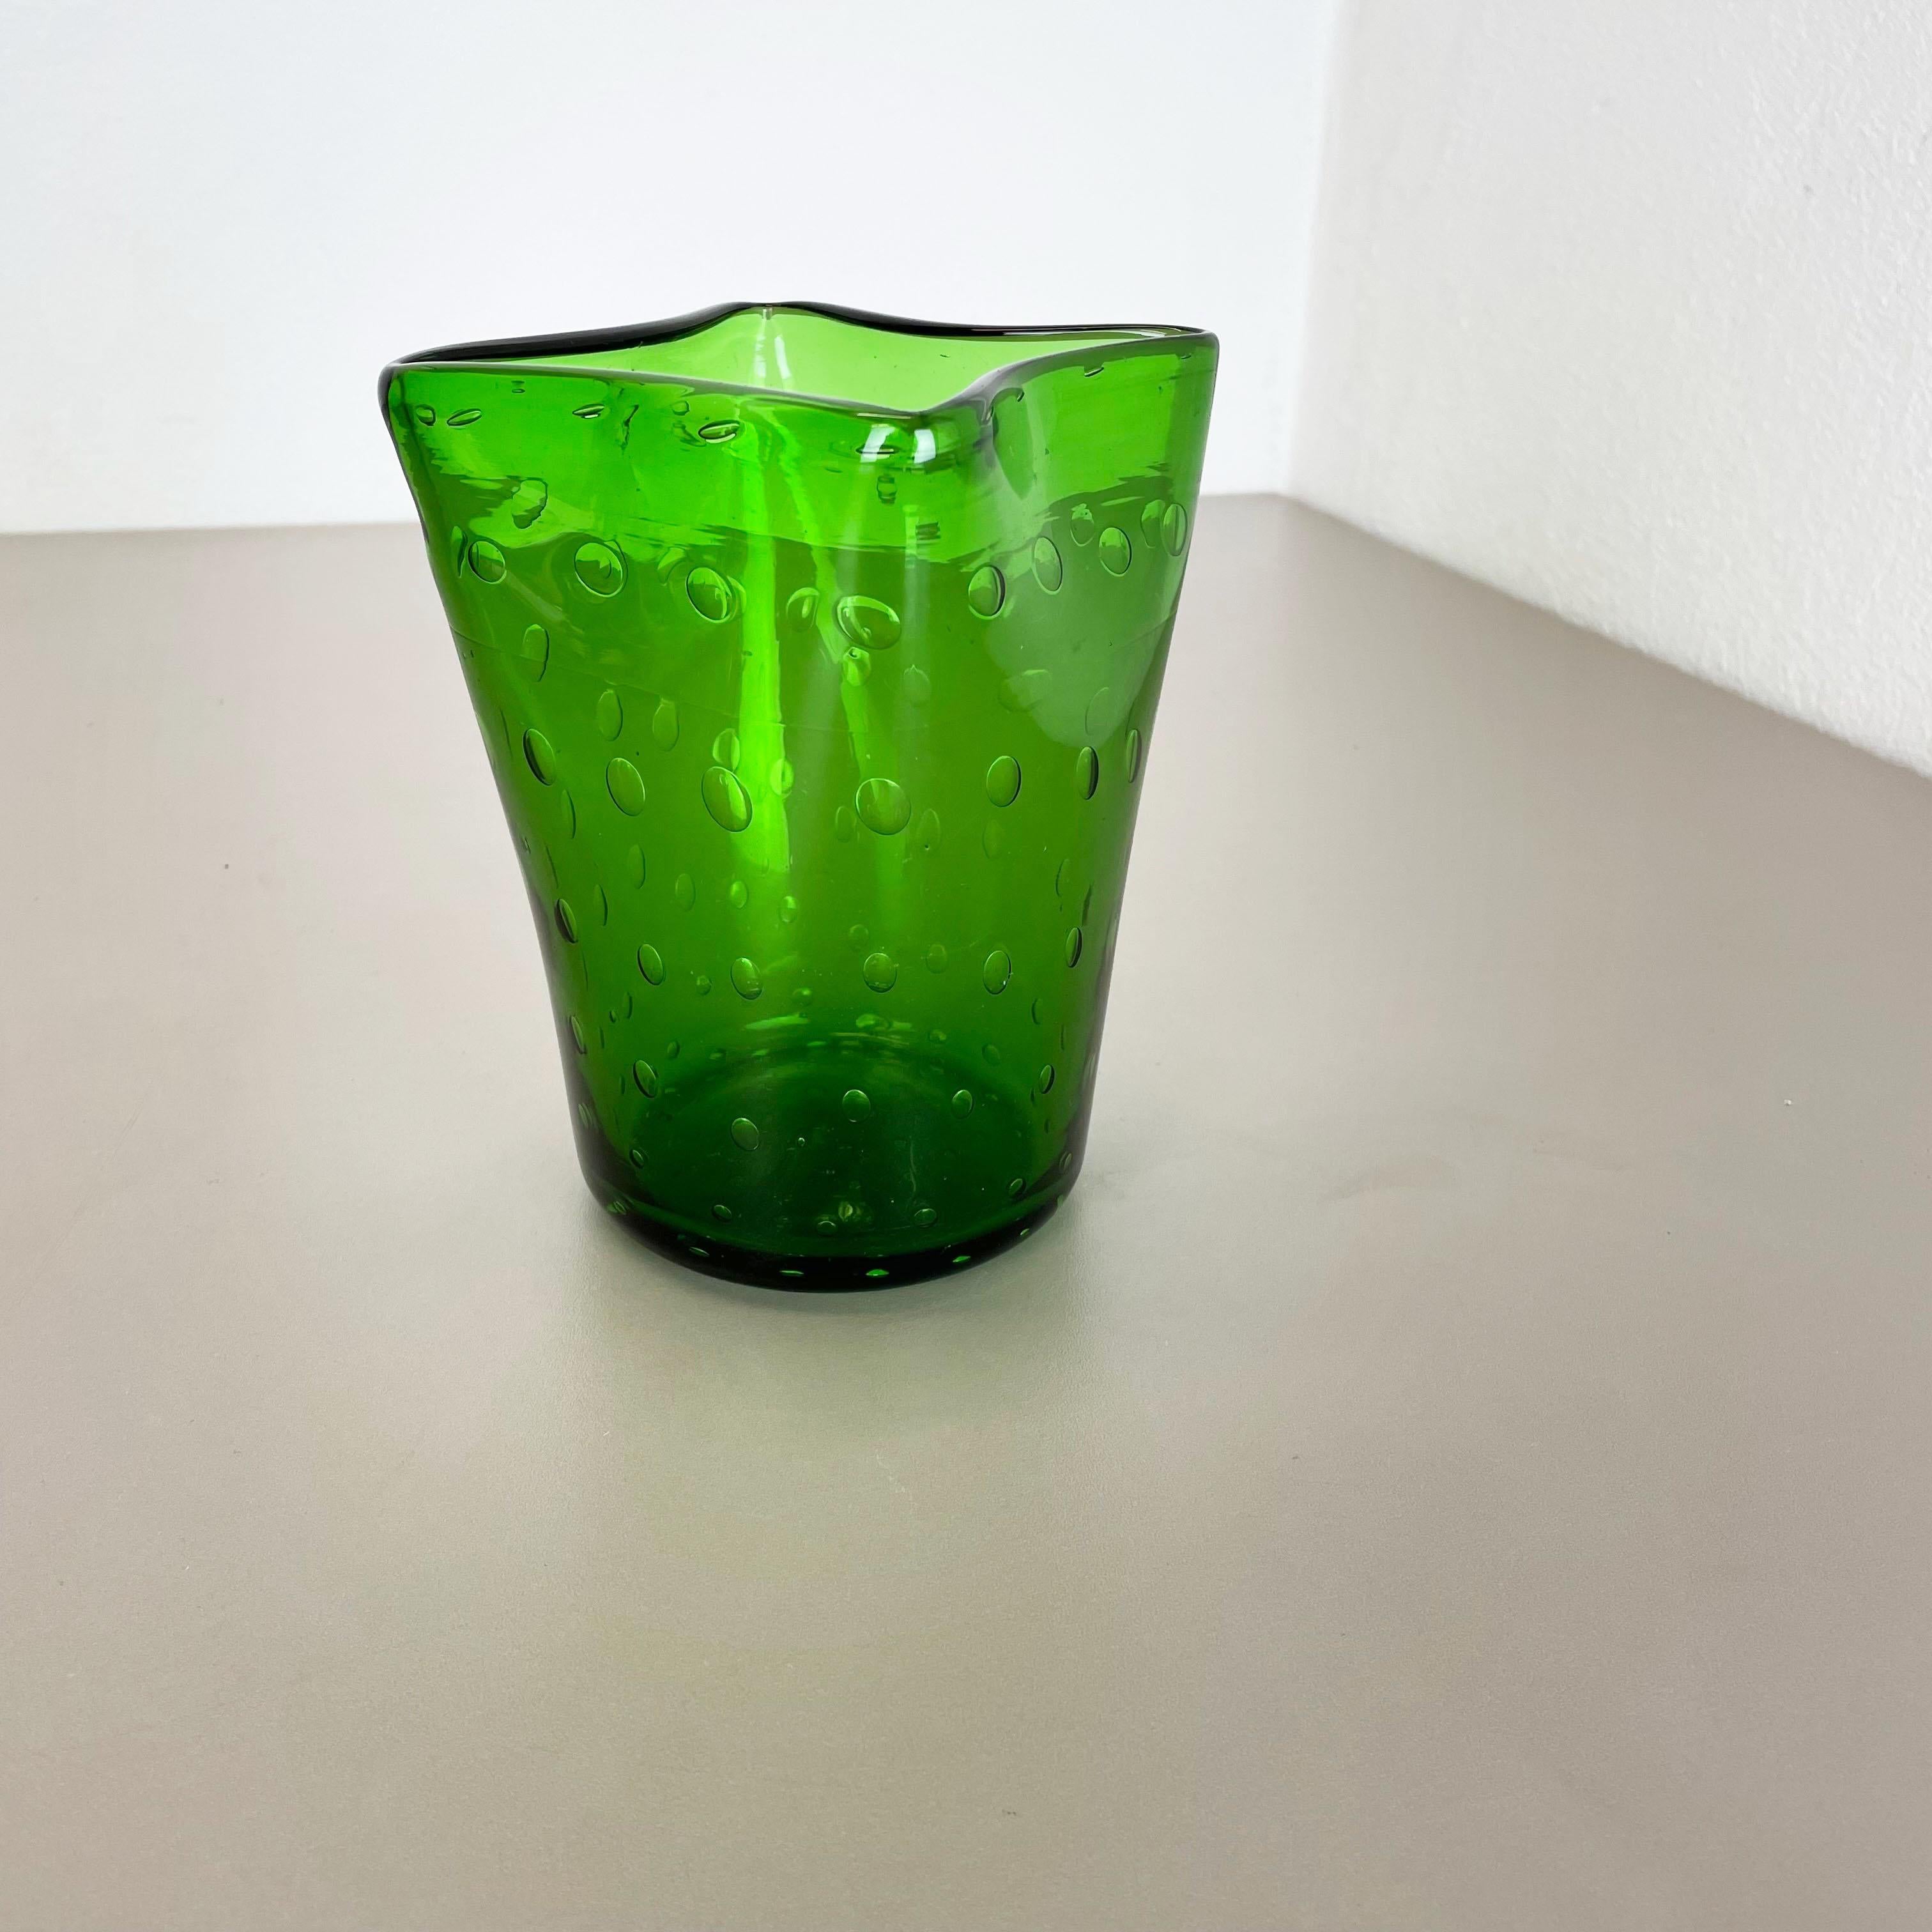 Article:

Murano glass vase element


Origin:

Murano, Italy


Decade:

1970s


This original glass vase element was produced in the 1970s in Murano, Italy. An elegant green Murano glass element utilizing the bullicante technique of controlled